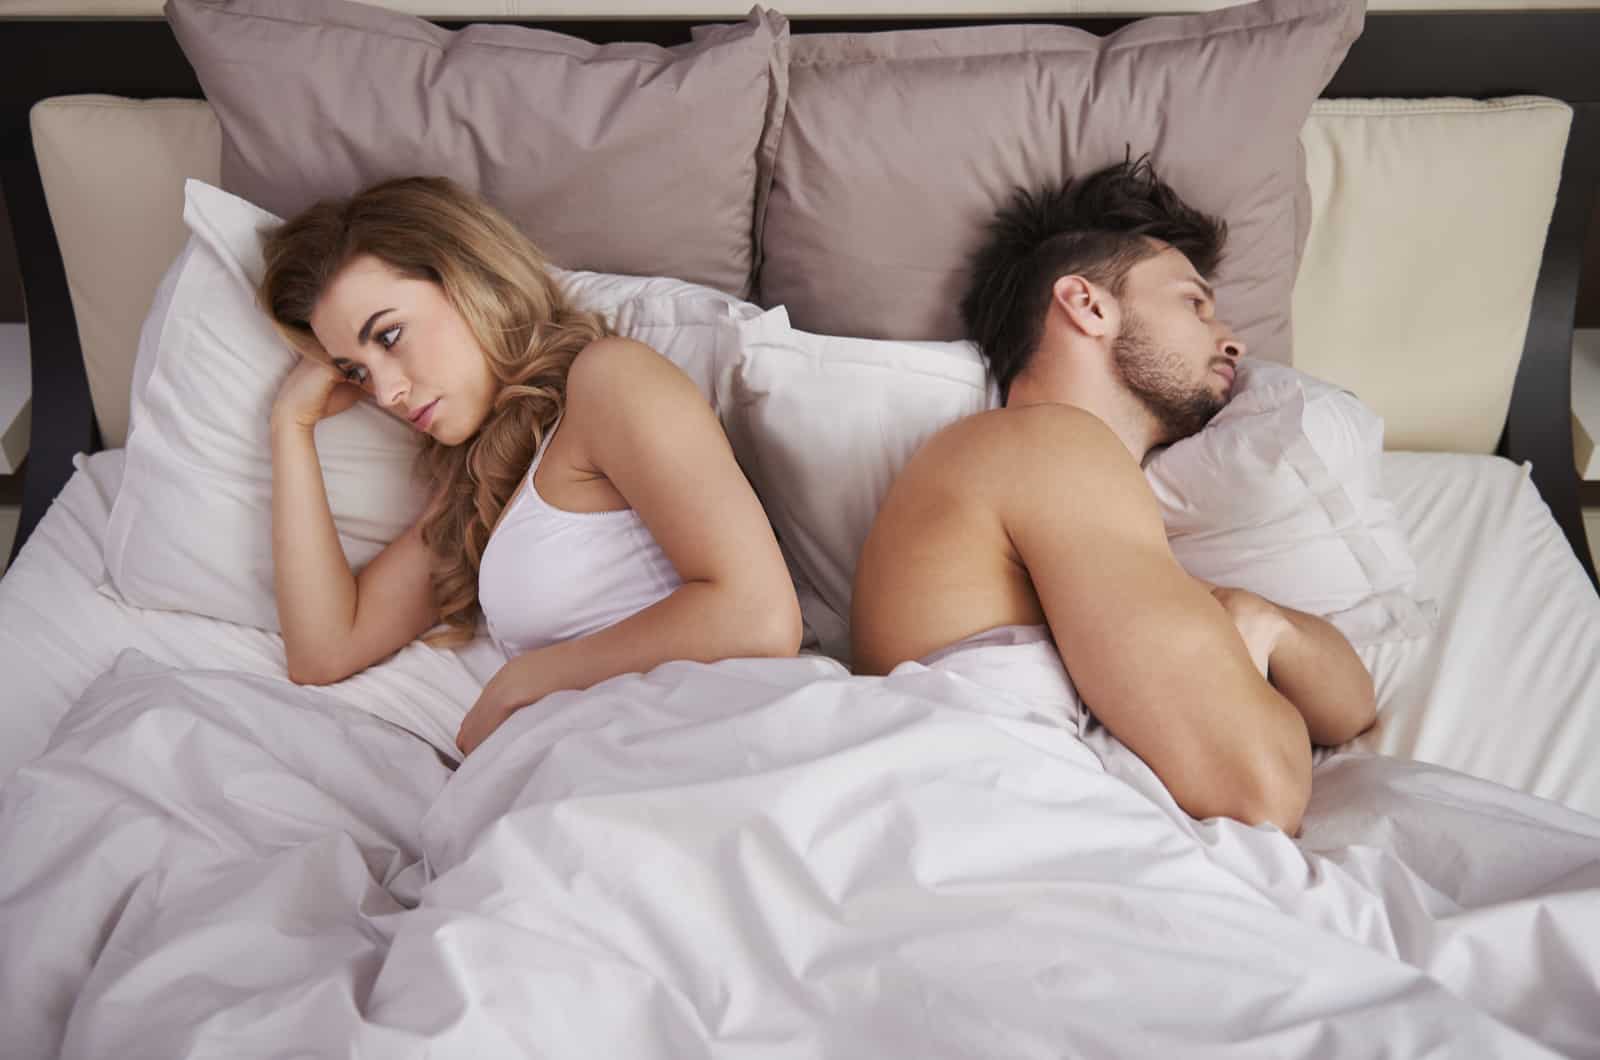 My Sexless Marriage Is Killing Me: 10 Solutions